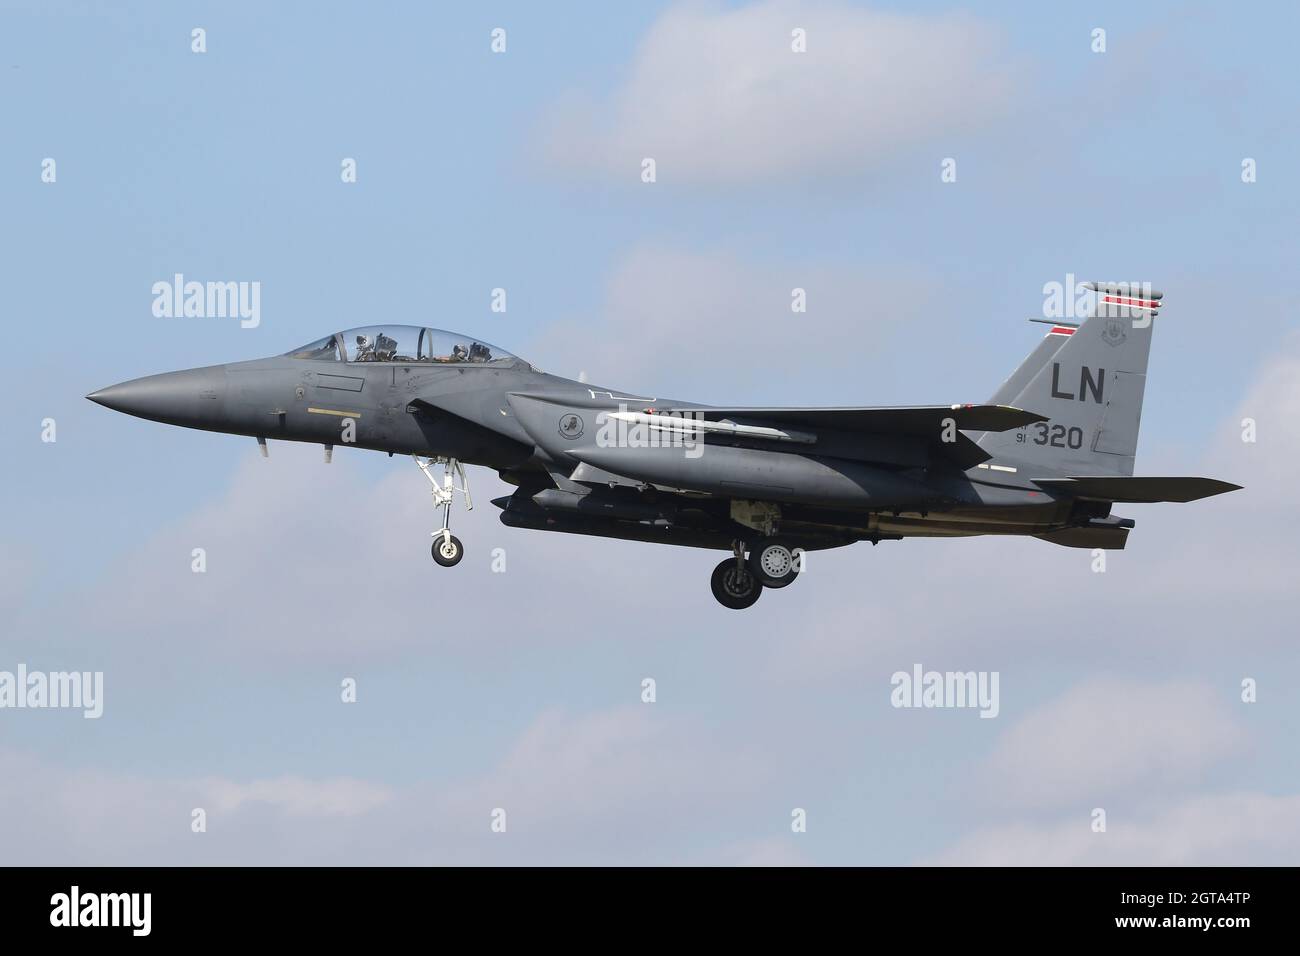 F-15E Strike Eagle from the 494th Fighter Squadron on the approach into RAF Lakenheath. Stock Photo